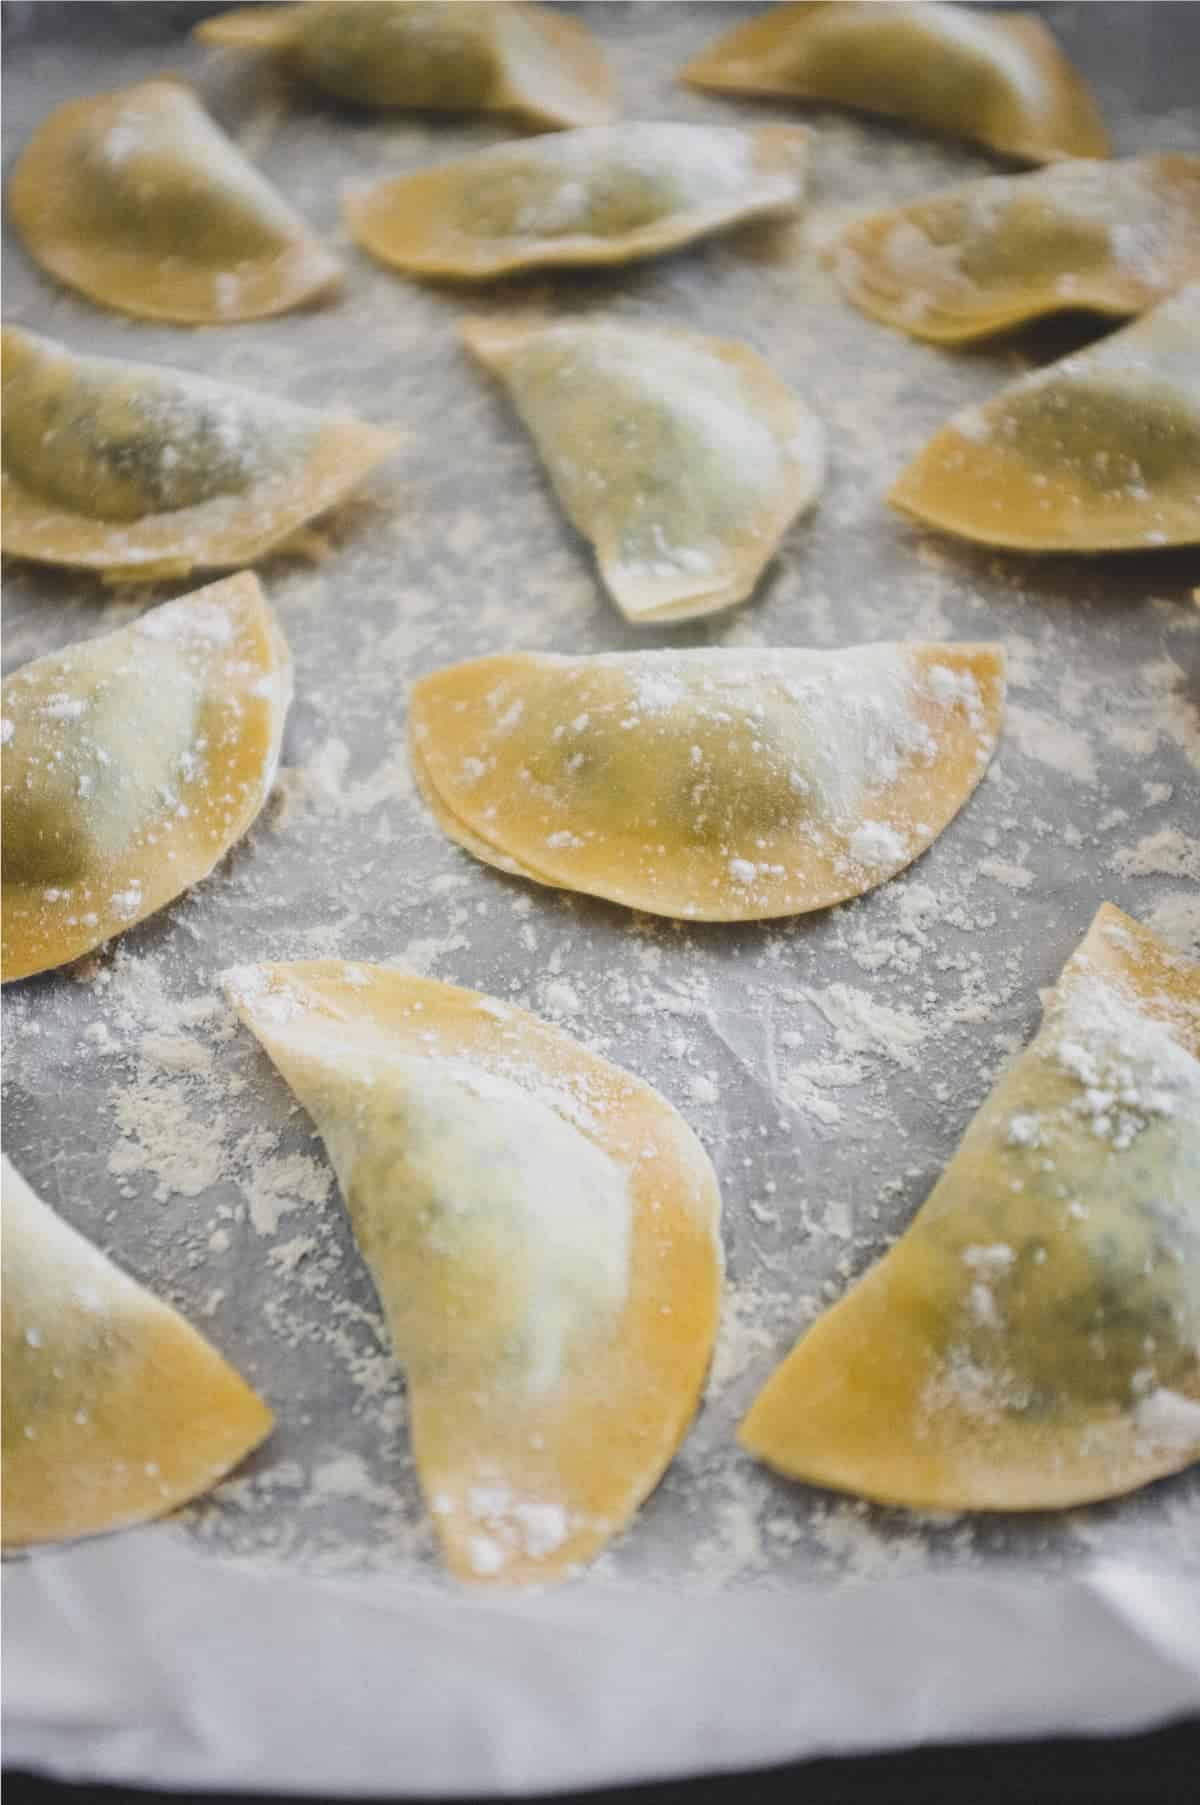 Freshly made mezzelune pasta half-moons on a baking tray lined with paper. The pasta is sprinkled with flour to stop them sticking.